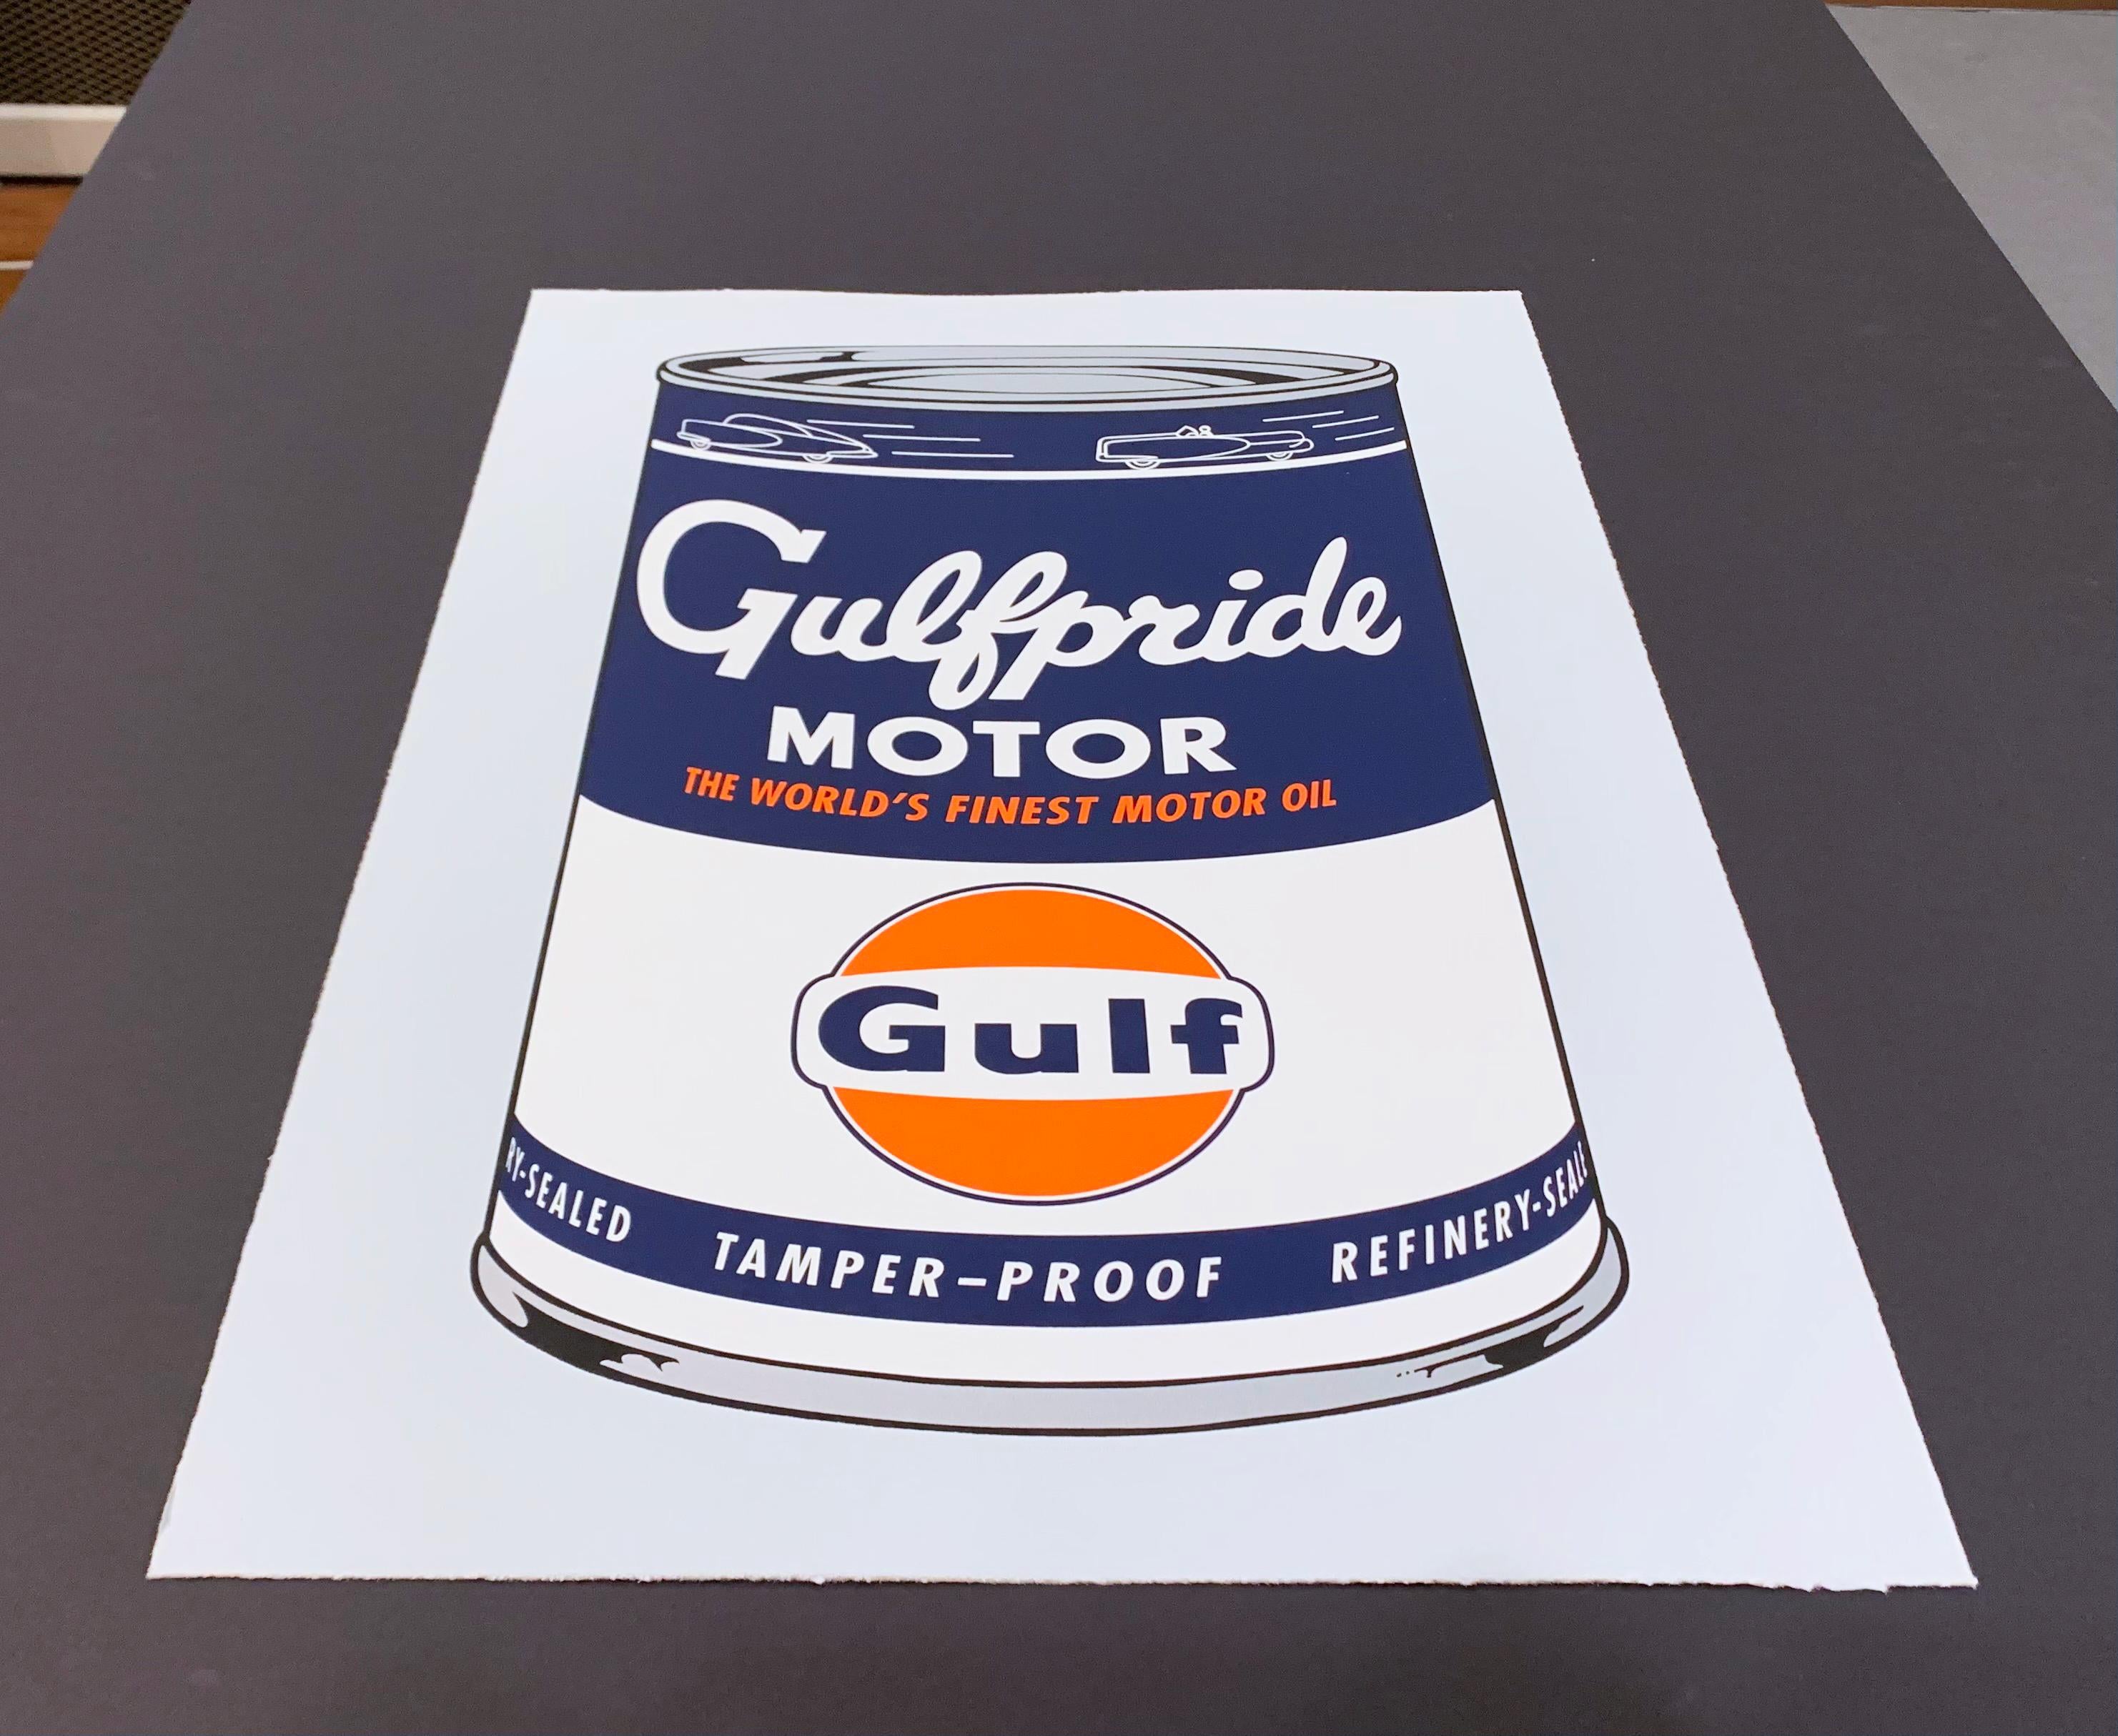 Artist: Heiner Meyer
Medium: Screenprint (multi-colored) on handmade paper
Title: Gulf
Portfolio: Masterpieces in Oils
Signed: Hand signed and numbered on reverse
Year: 2016
Edition: 45/60
Framed Size: 32 3/4